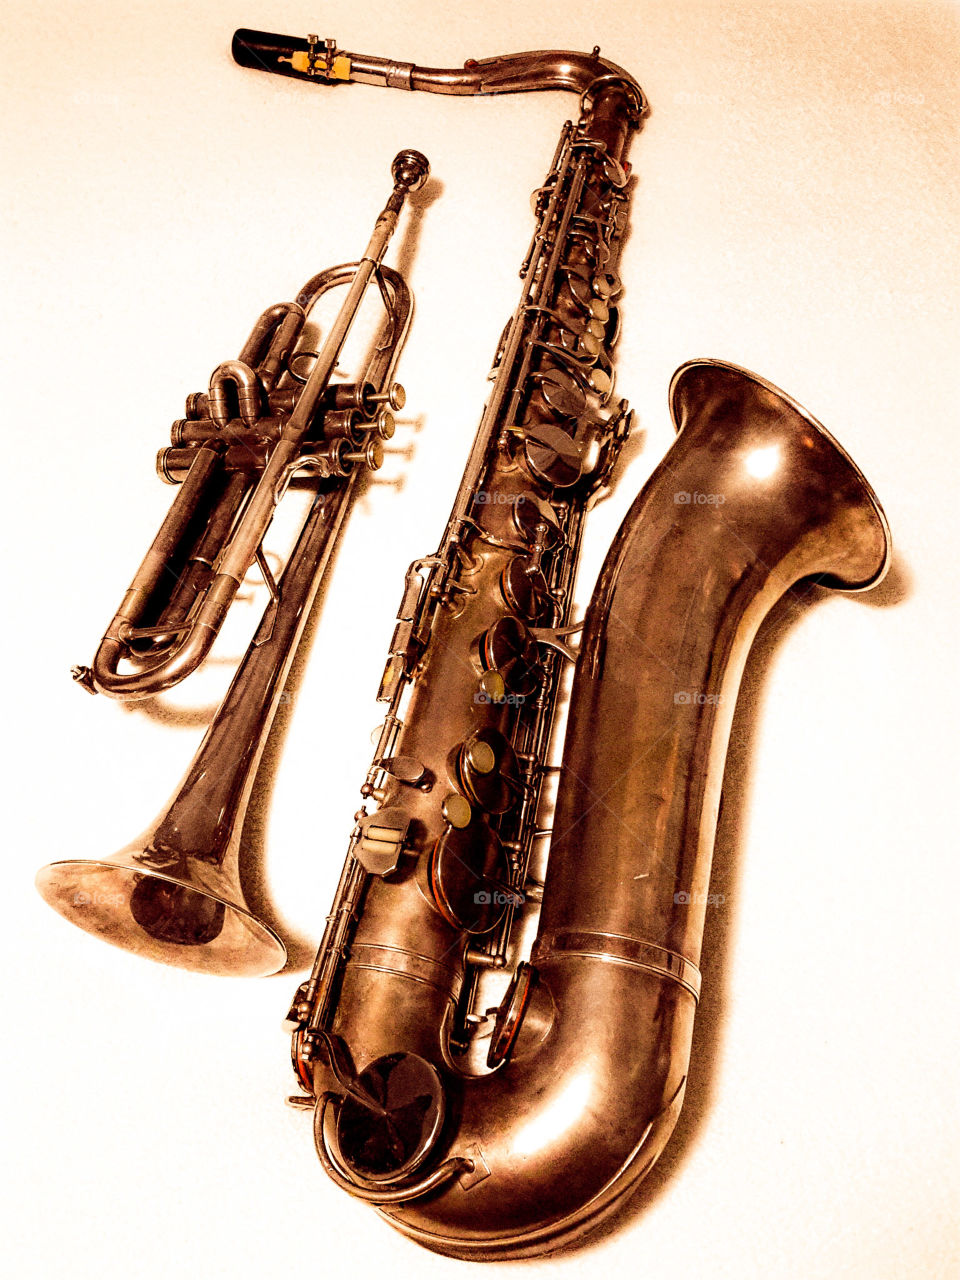 brass musical instruments. trumpet and saxophone in brass